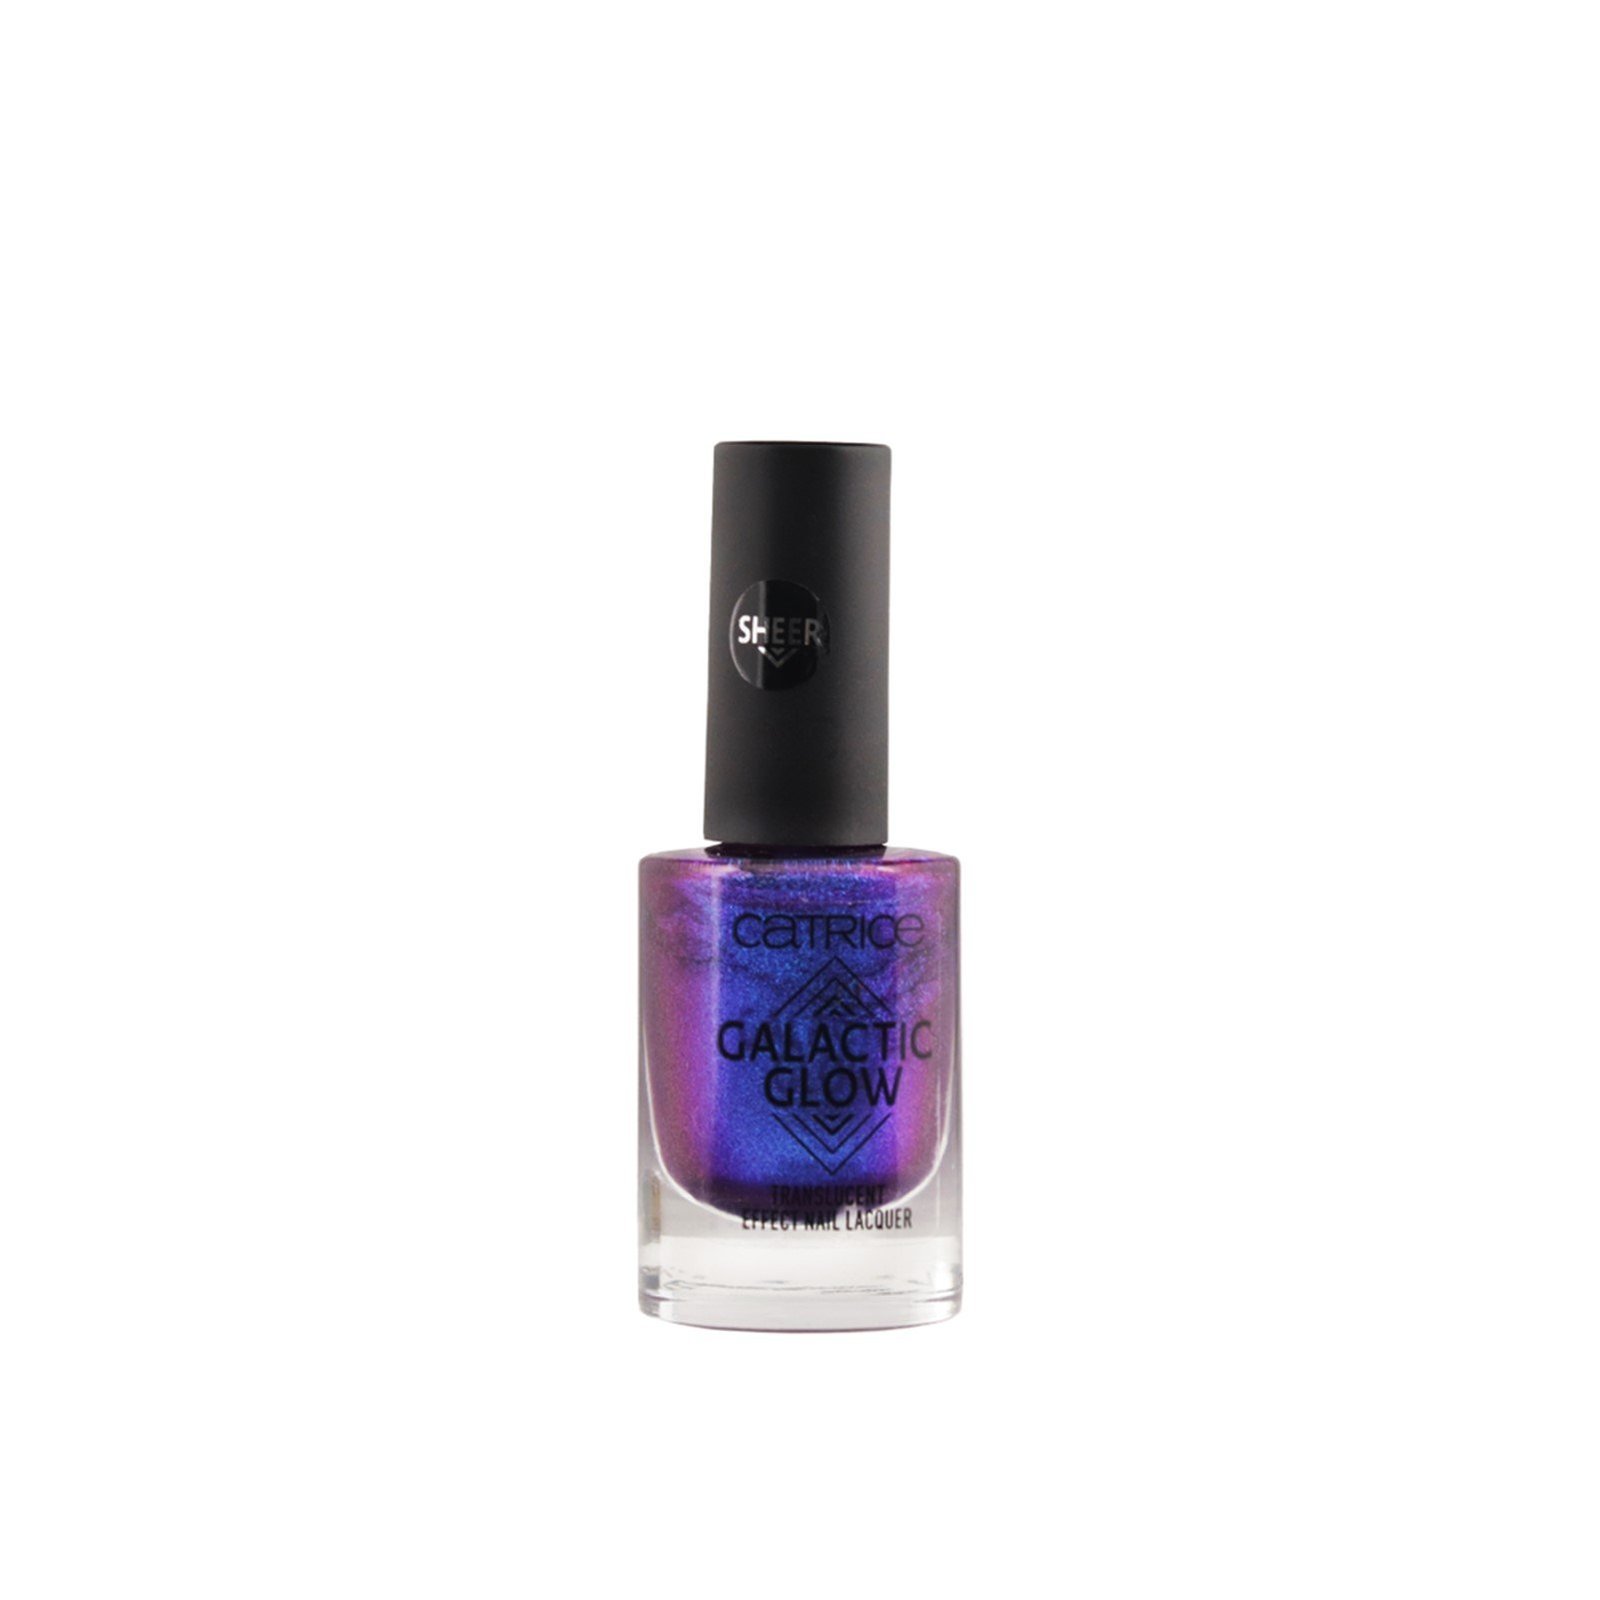 Catrice Galactic Glow Translucent Effect Nail Lacquer 07 Feel The Cosmic Vibe 8ml (0.27 fl oz)